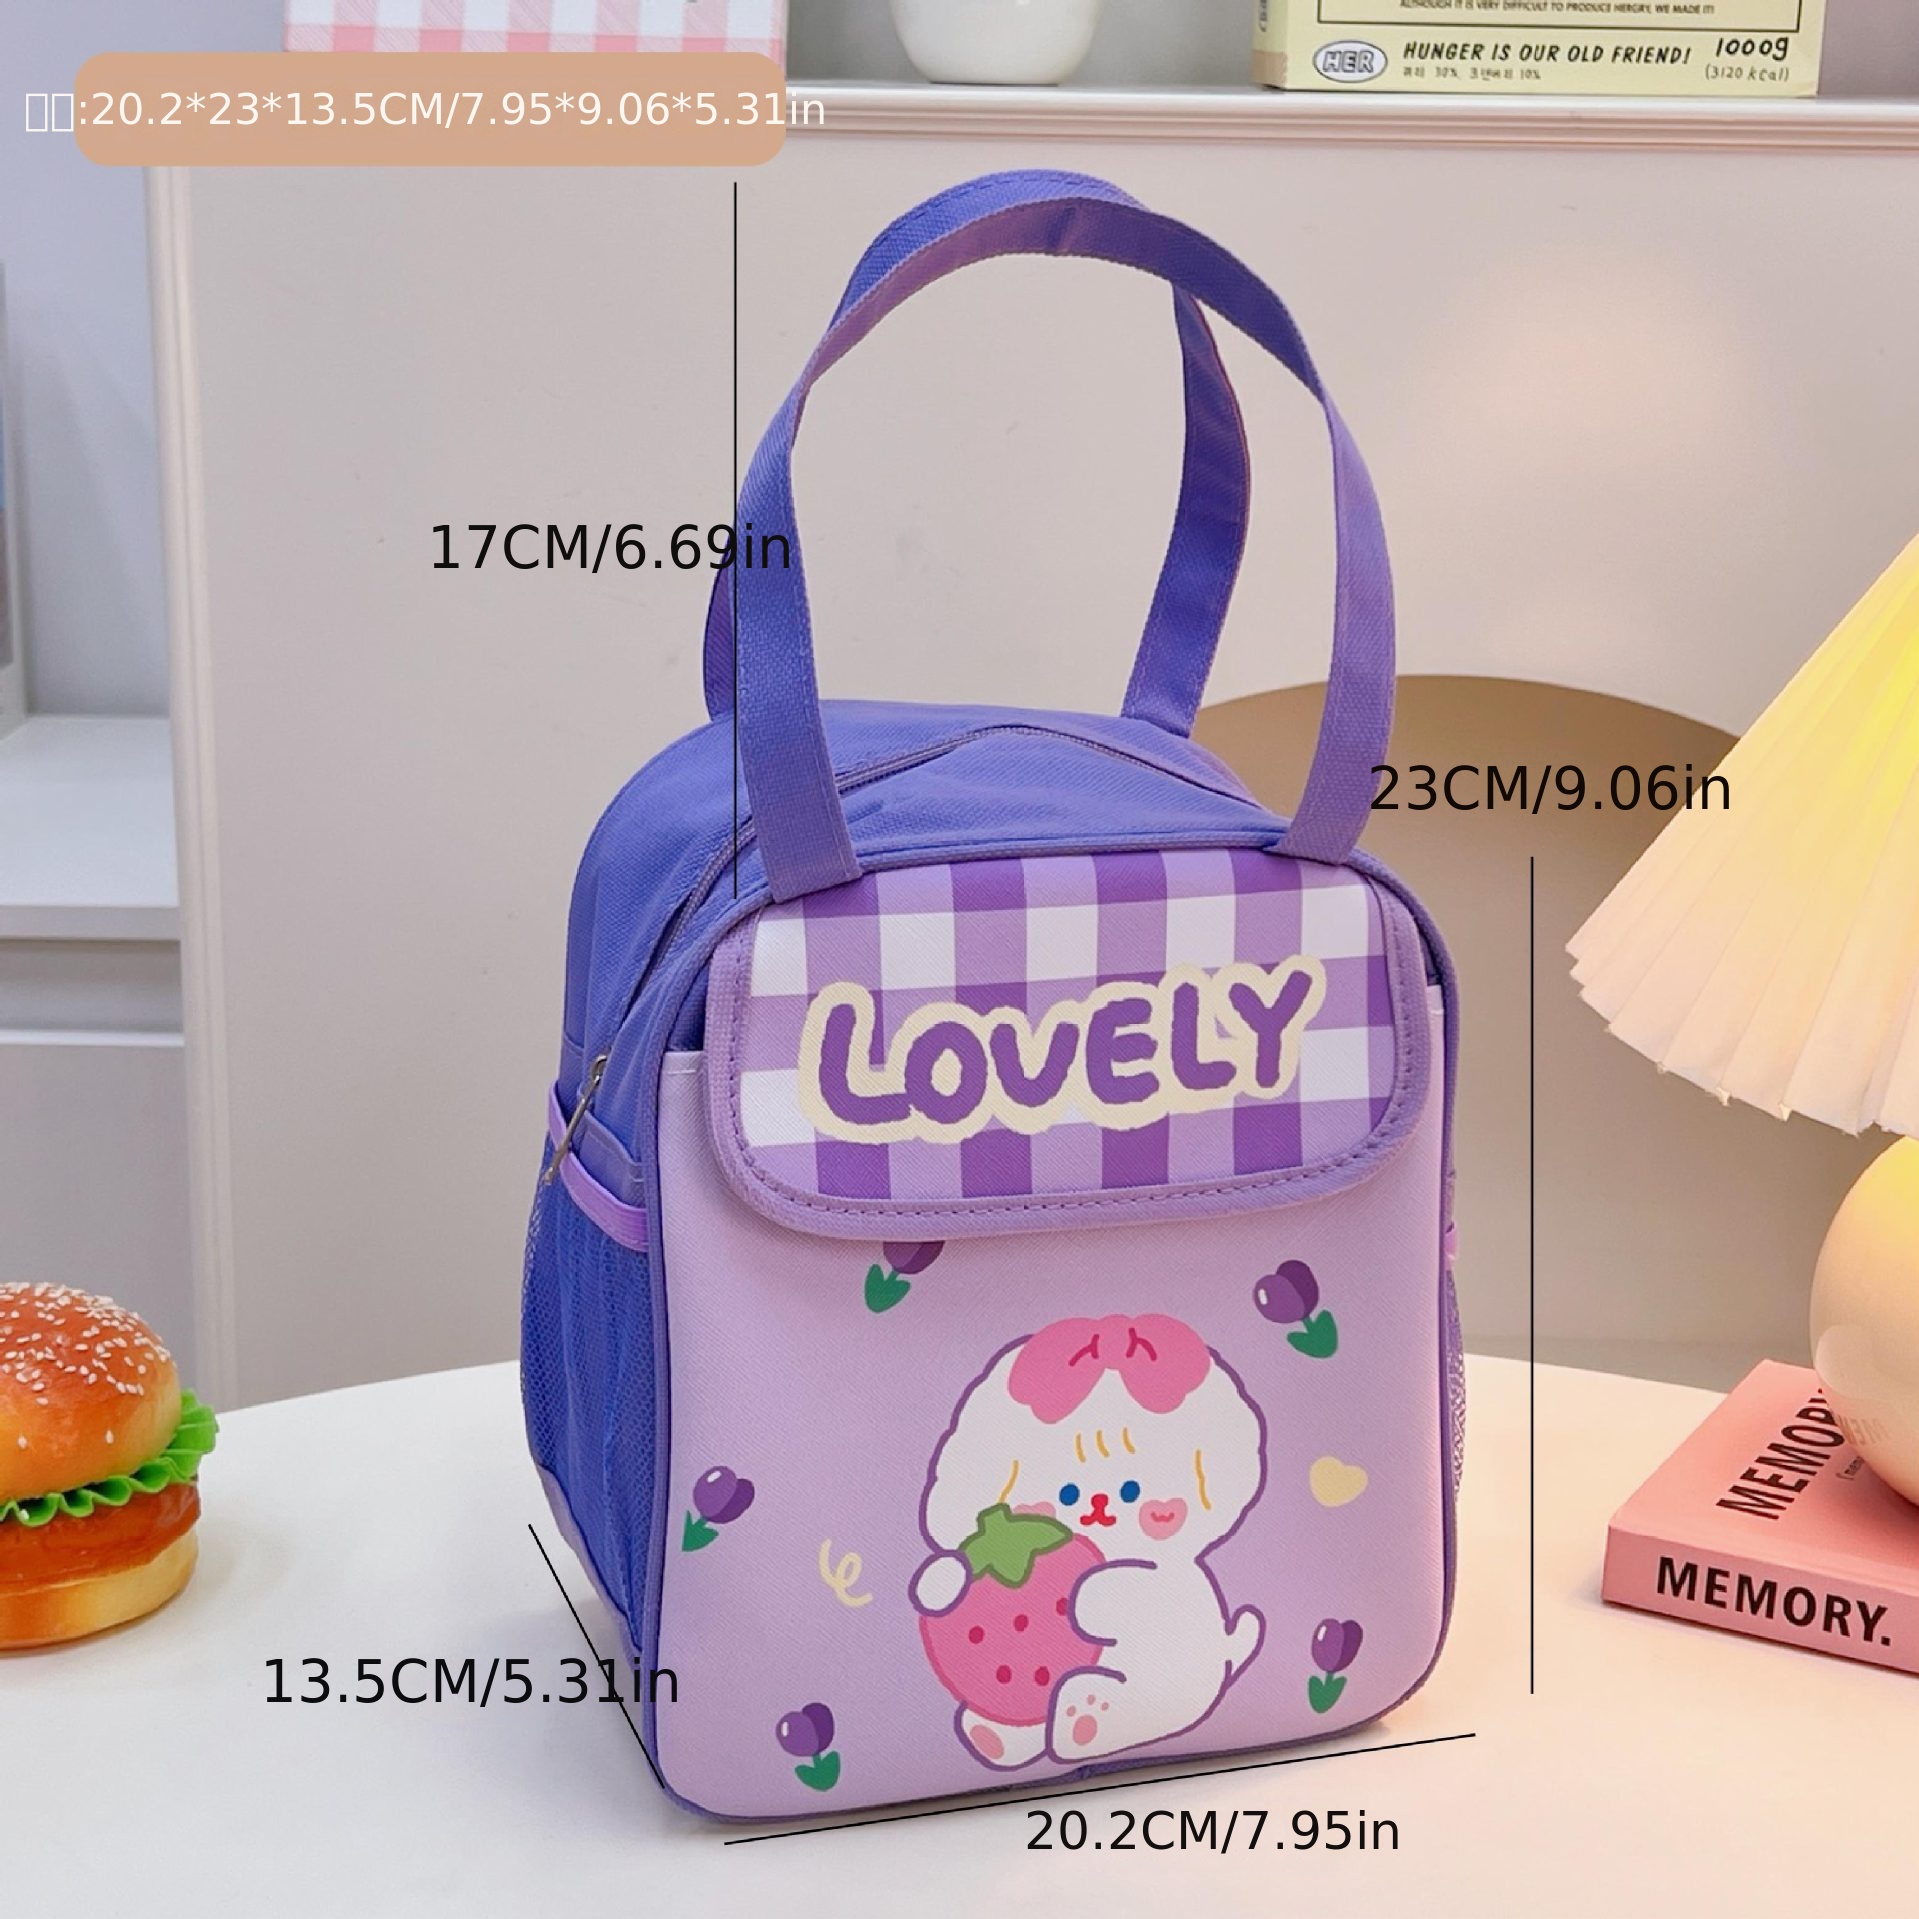 Lovely Cartoon Thermal Insulated Lunch Bag For Kids, Students With